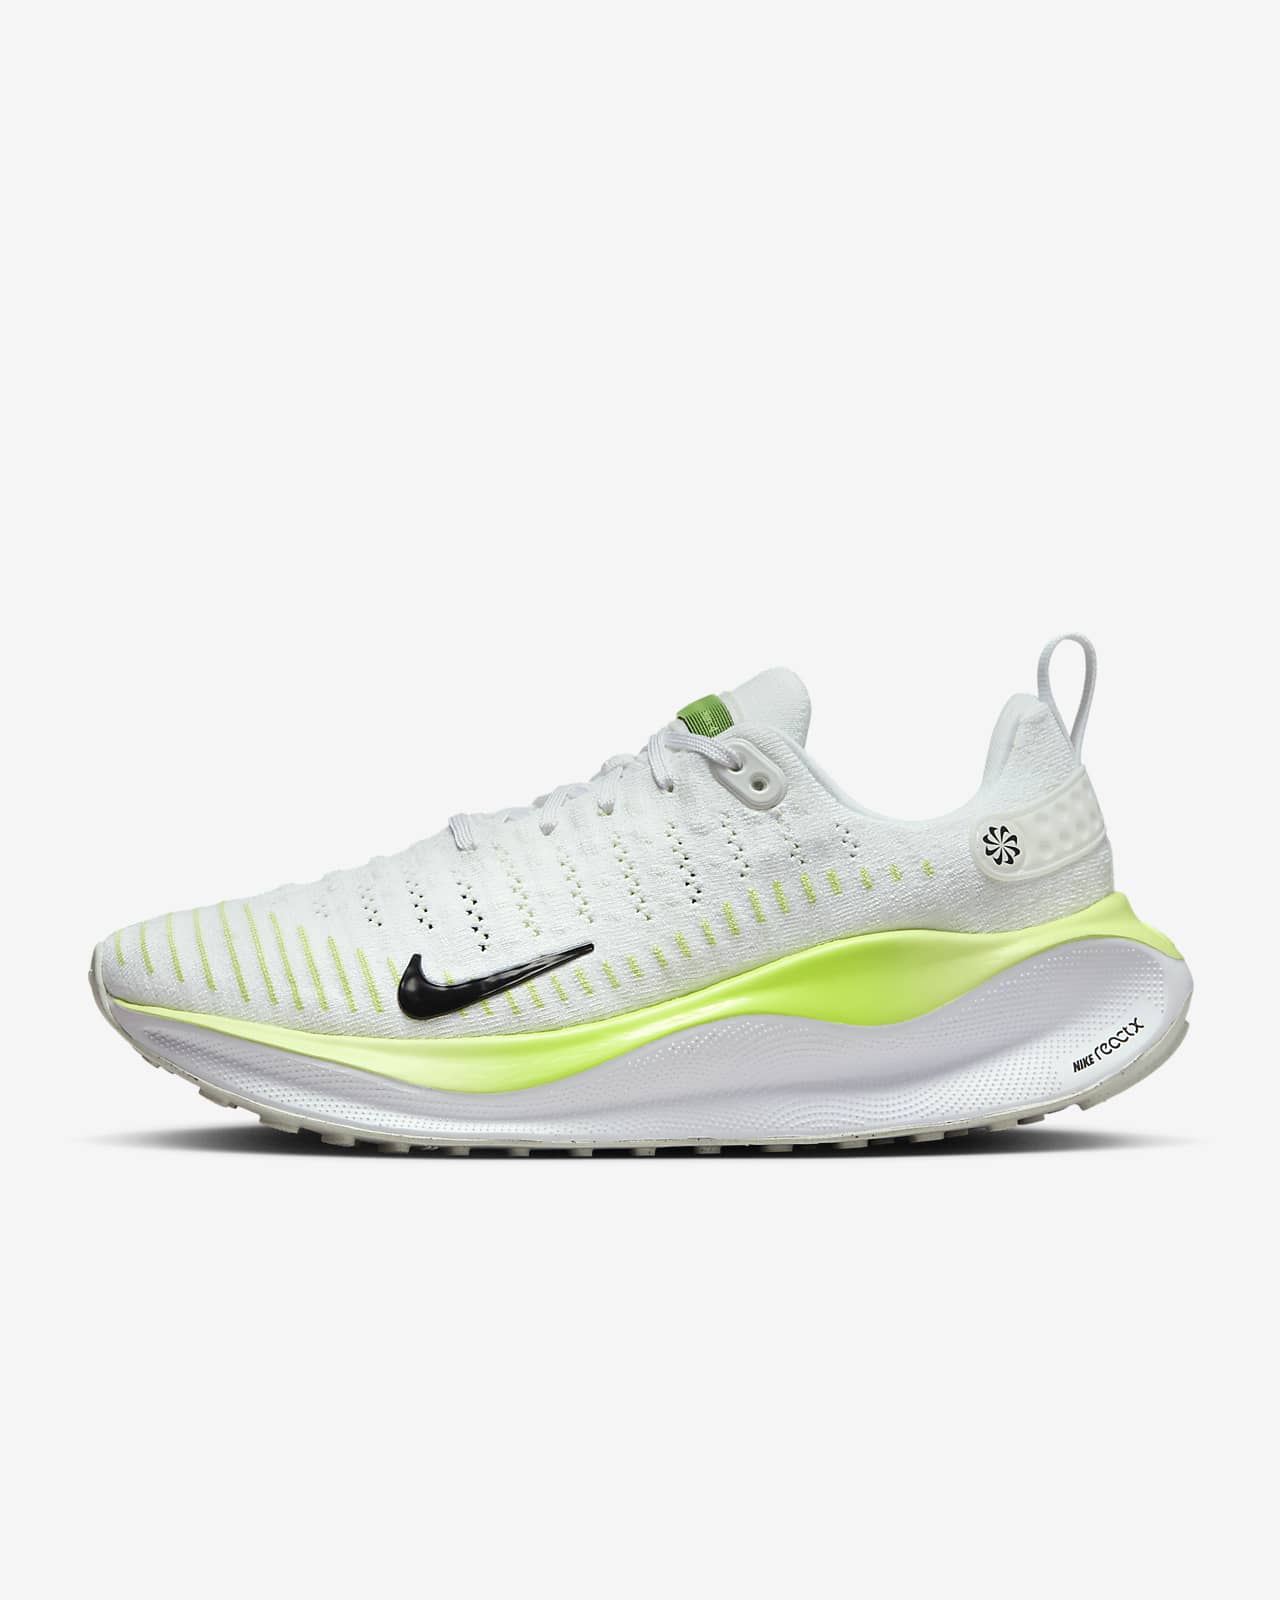 Nike InfinityRN 4 Women's Road Running Shoes (Extra Wide)